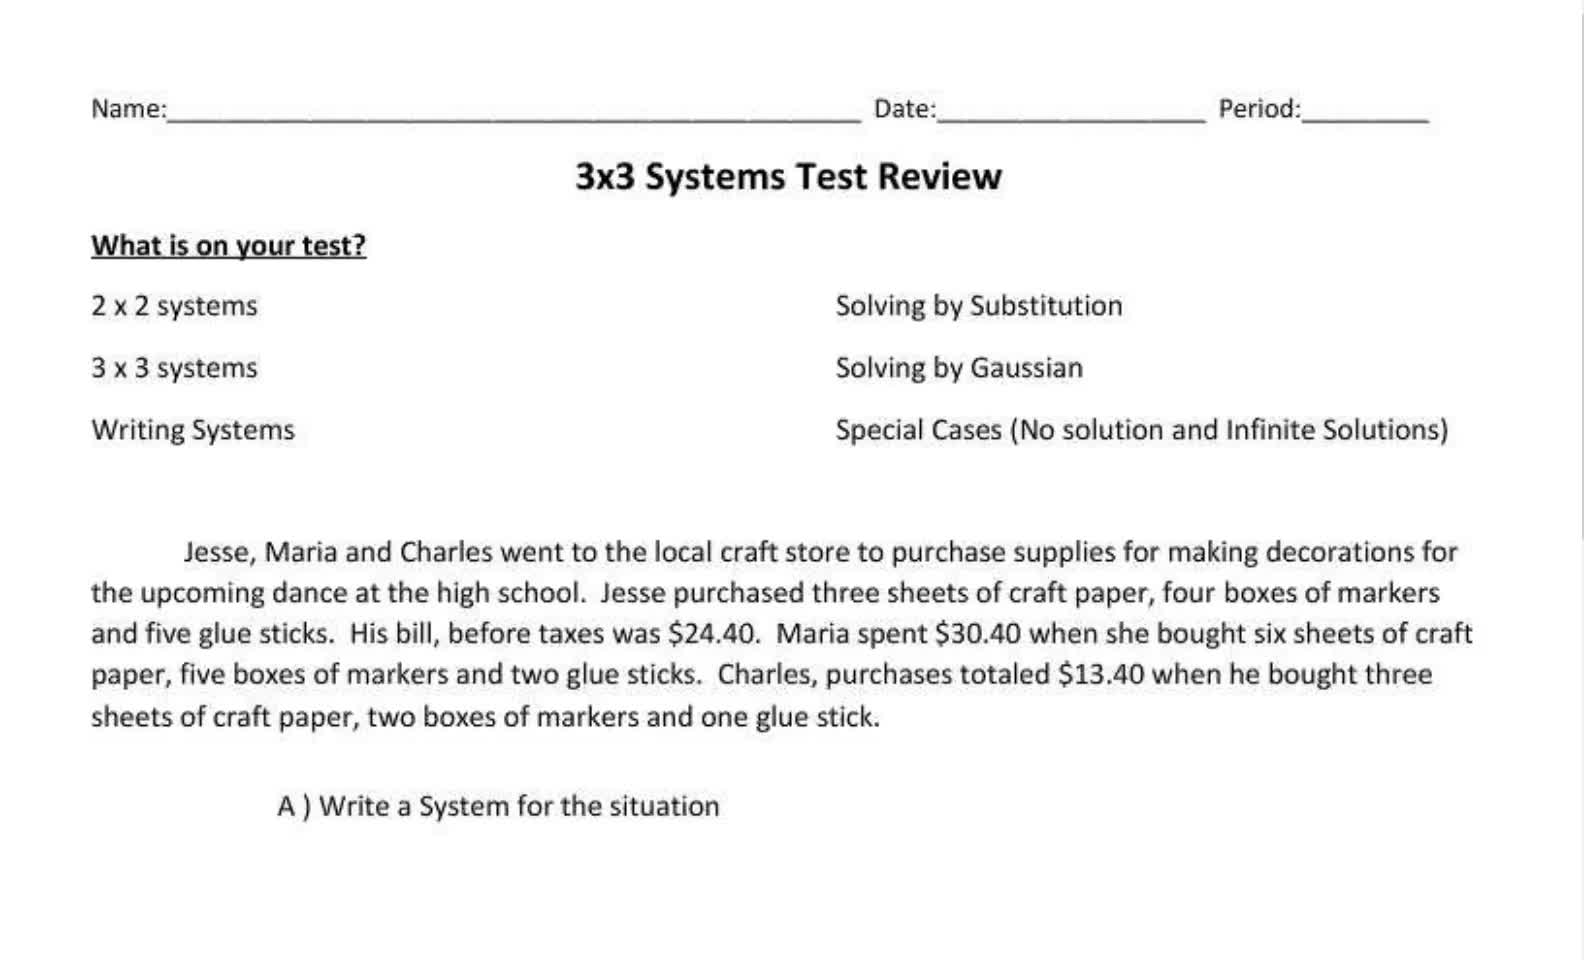 3 x 3 Systems Test Review